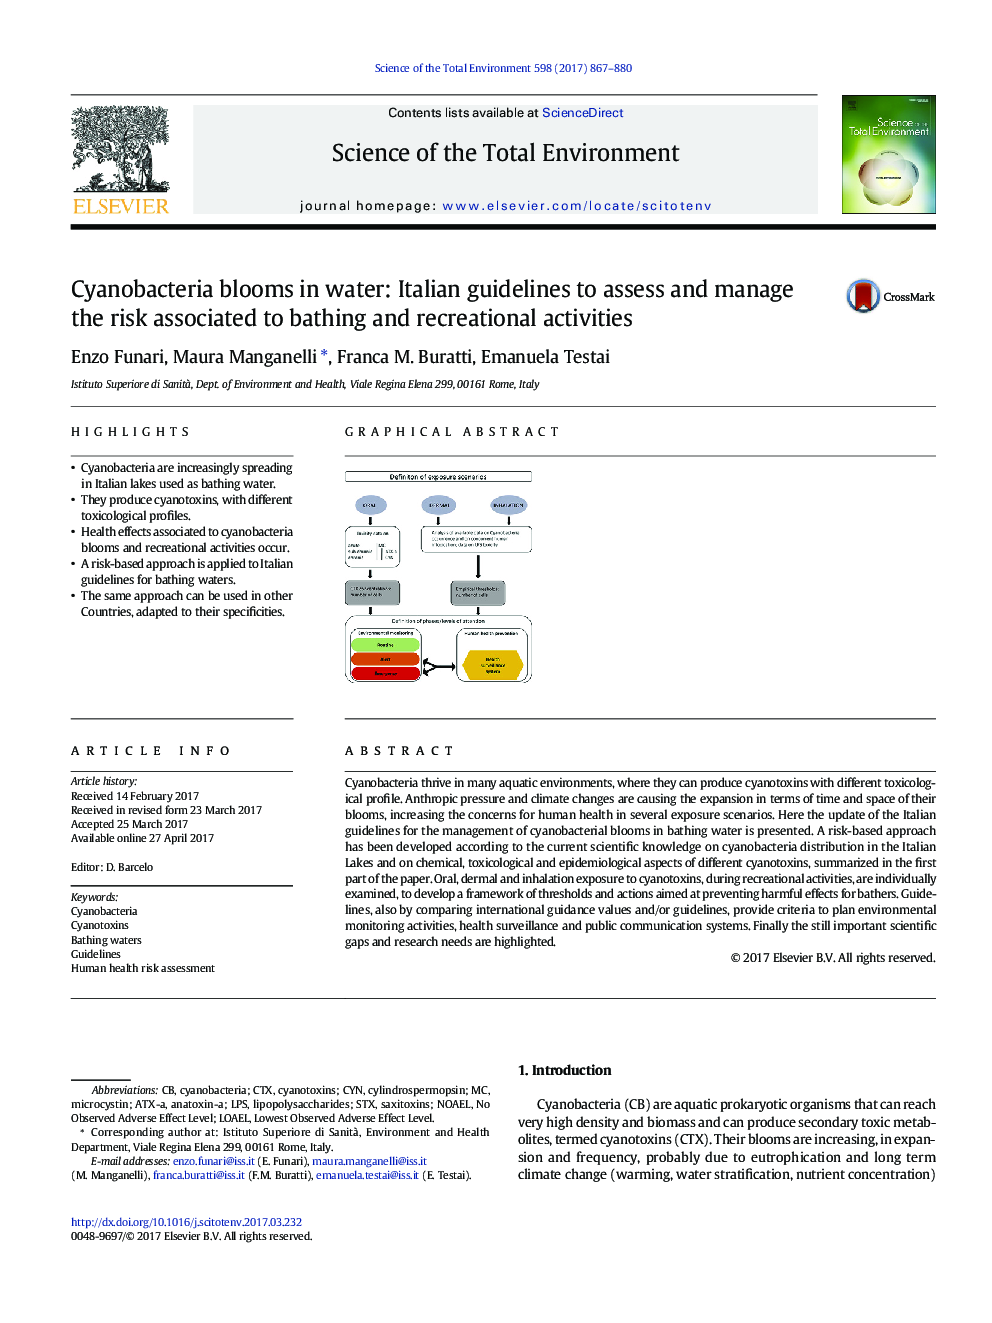 Cyanobacteria blooms in water: Italian guidelines to assess and manage the risk associated to bathing and recreational activities